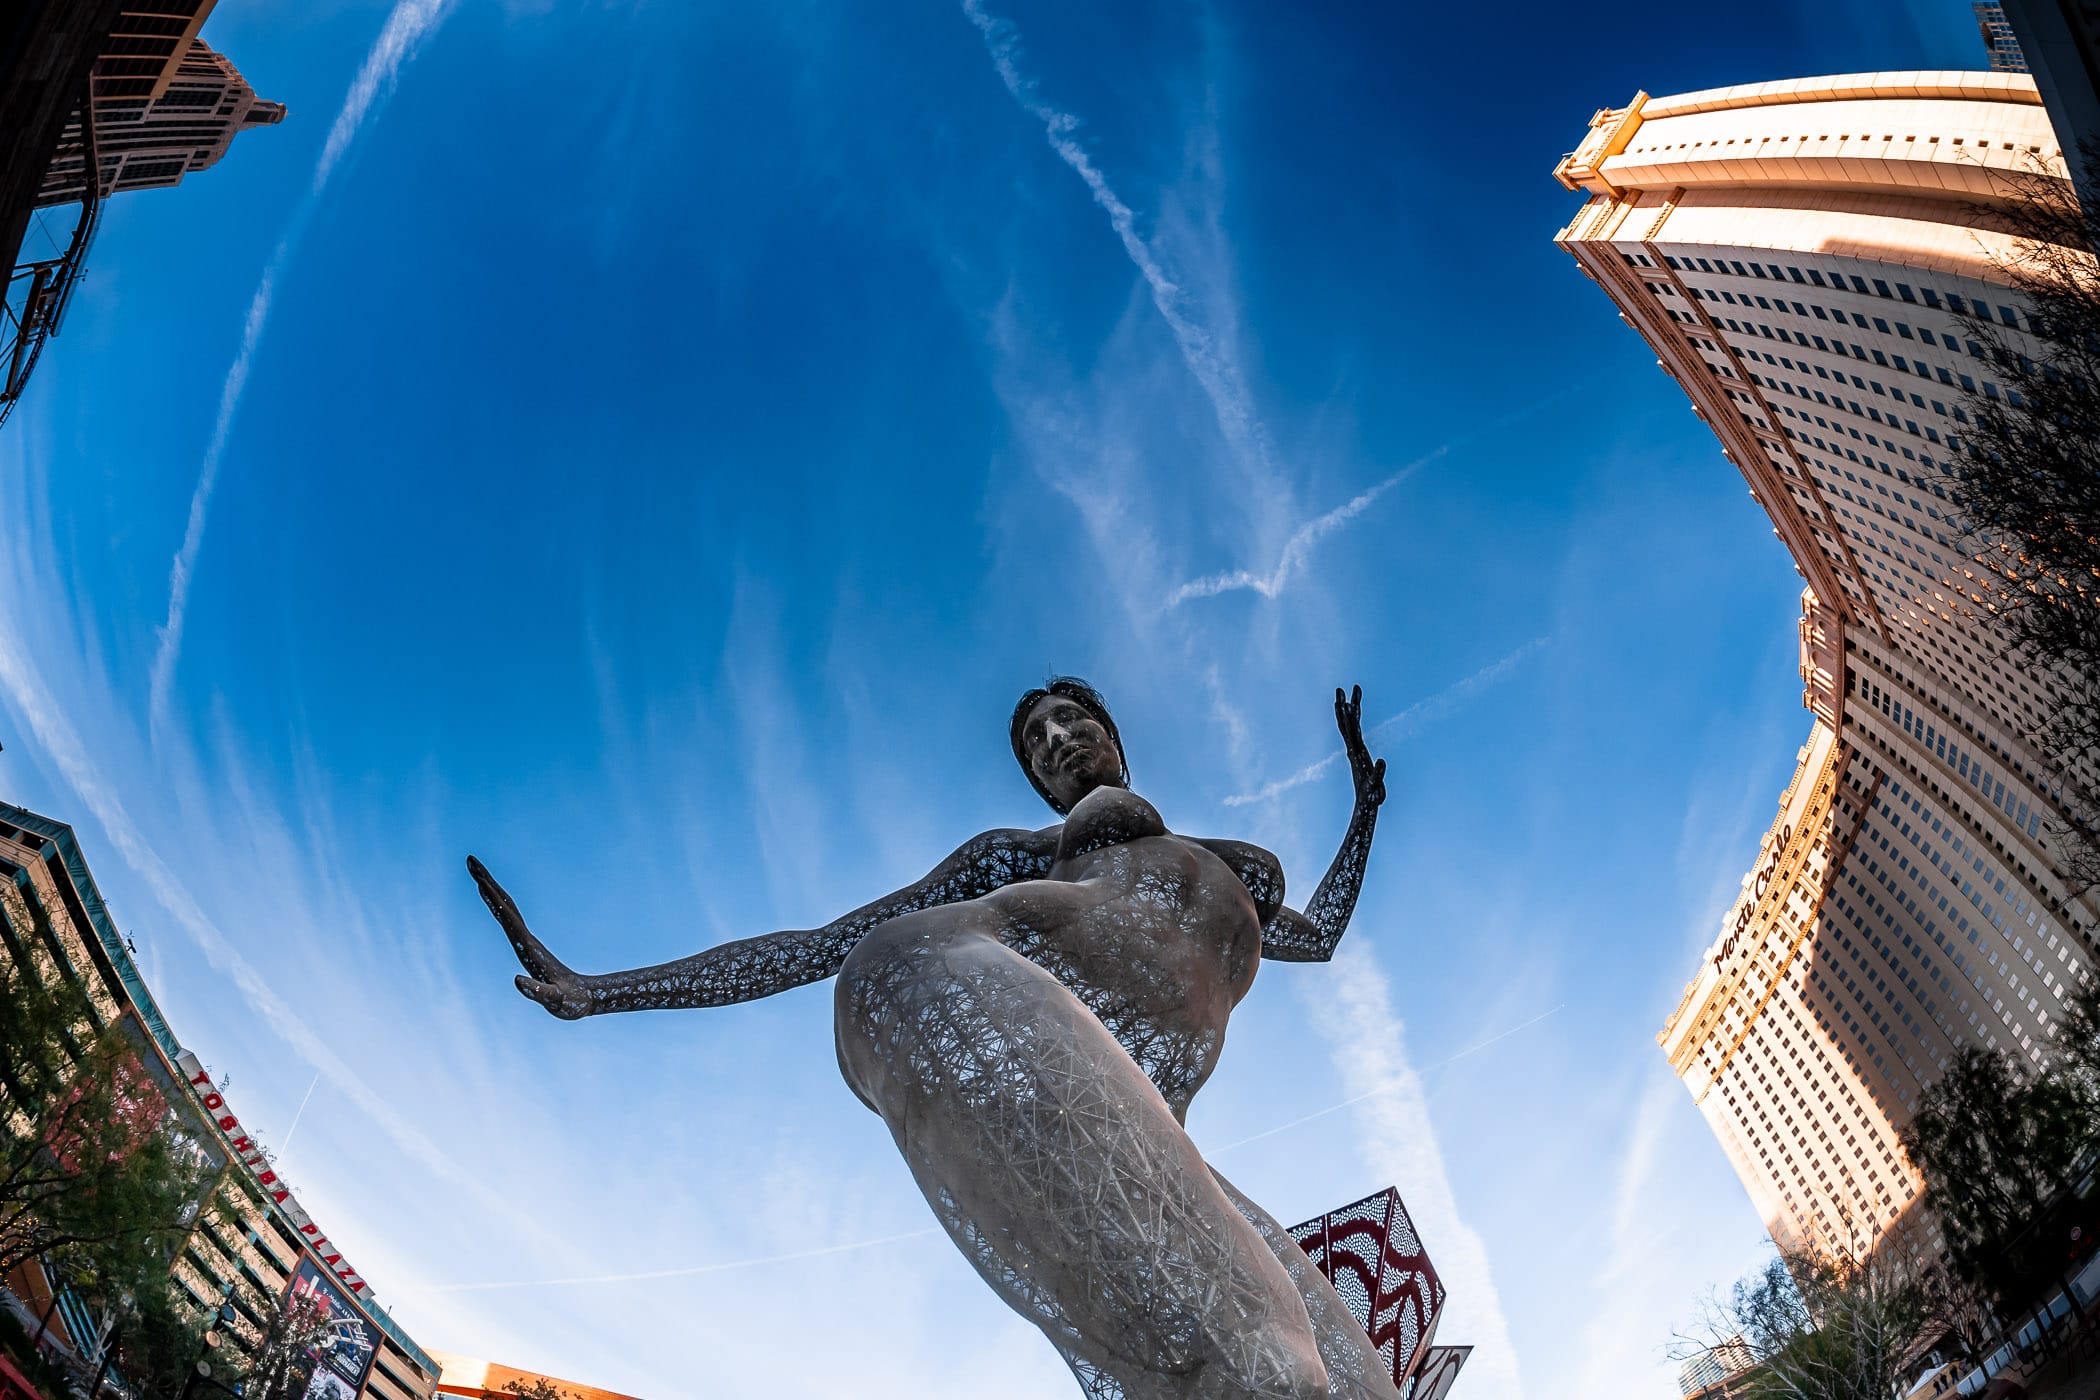 Marco Cochrane’s “Bliss Dance“, a 40-foot-tall sculpture on display at Las Vegas’ Park MGM, formerly the Monte Carlo Resort and Casino.